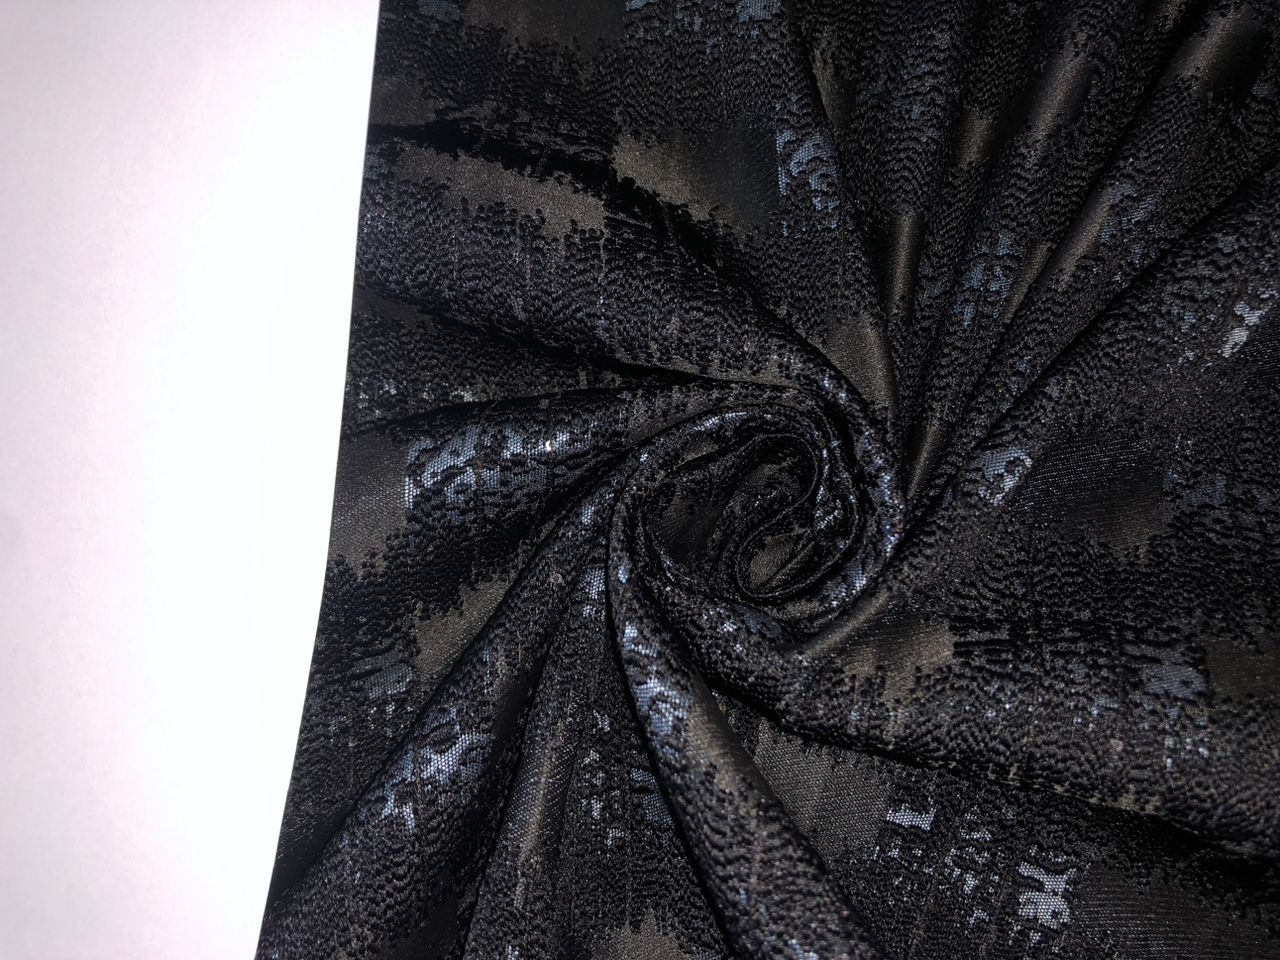 Brocade rich fabric black and grey jacquard with subtle metallic silver 58" wide BRO913[4]